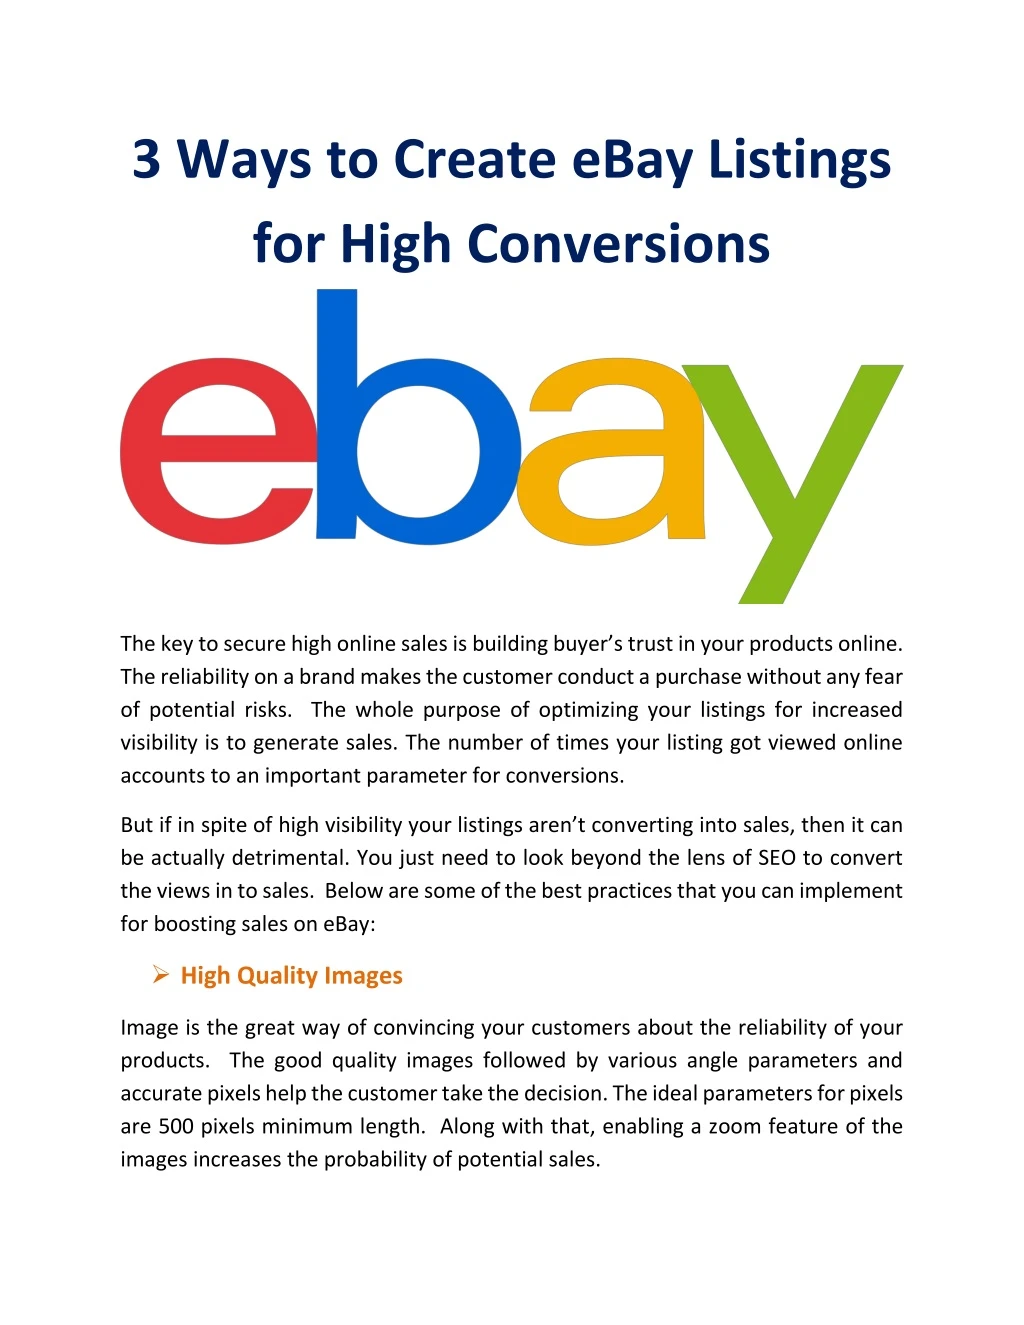 3 ways to create ebay listings for high